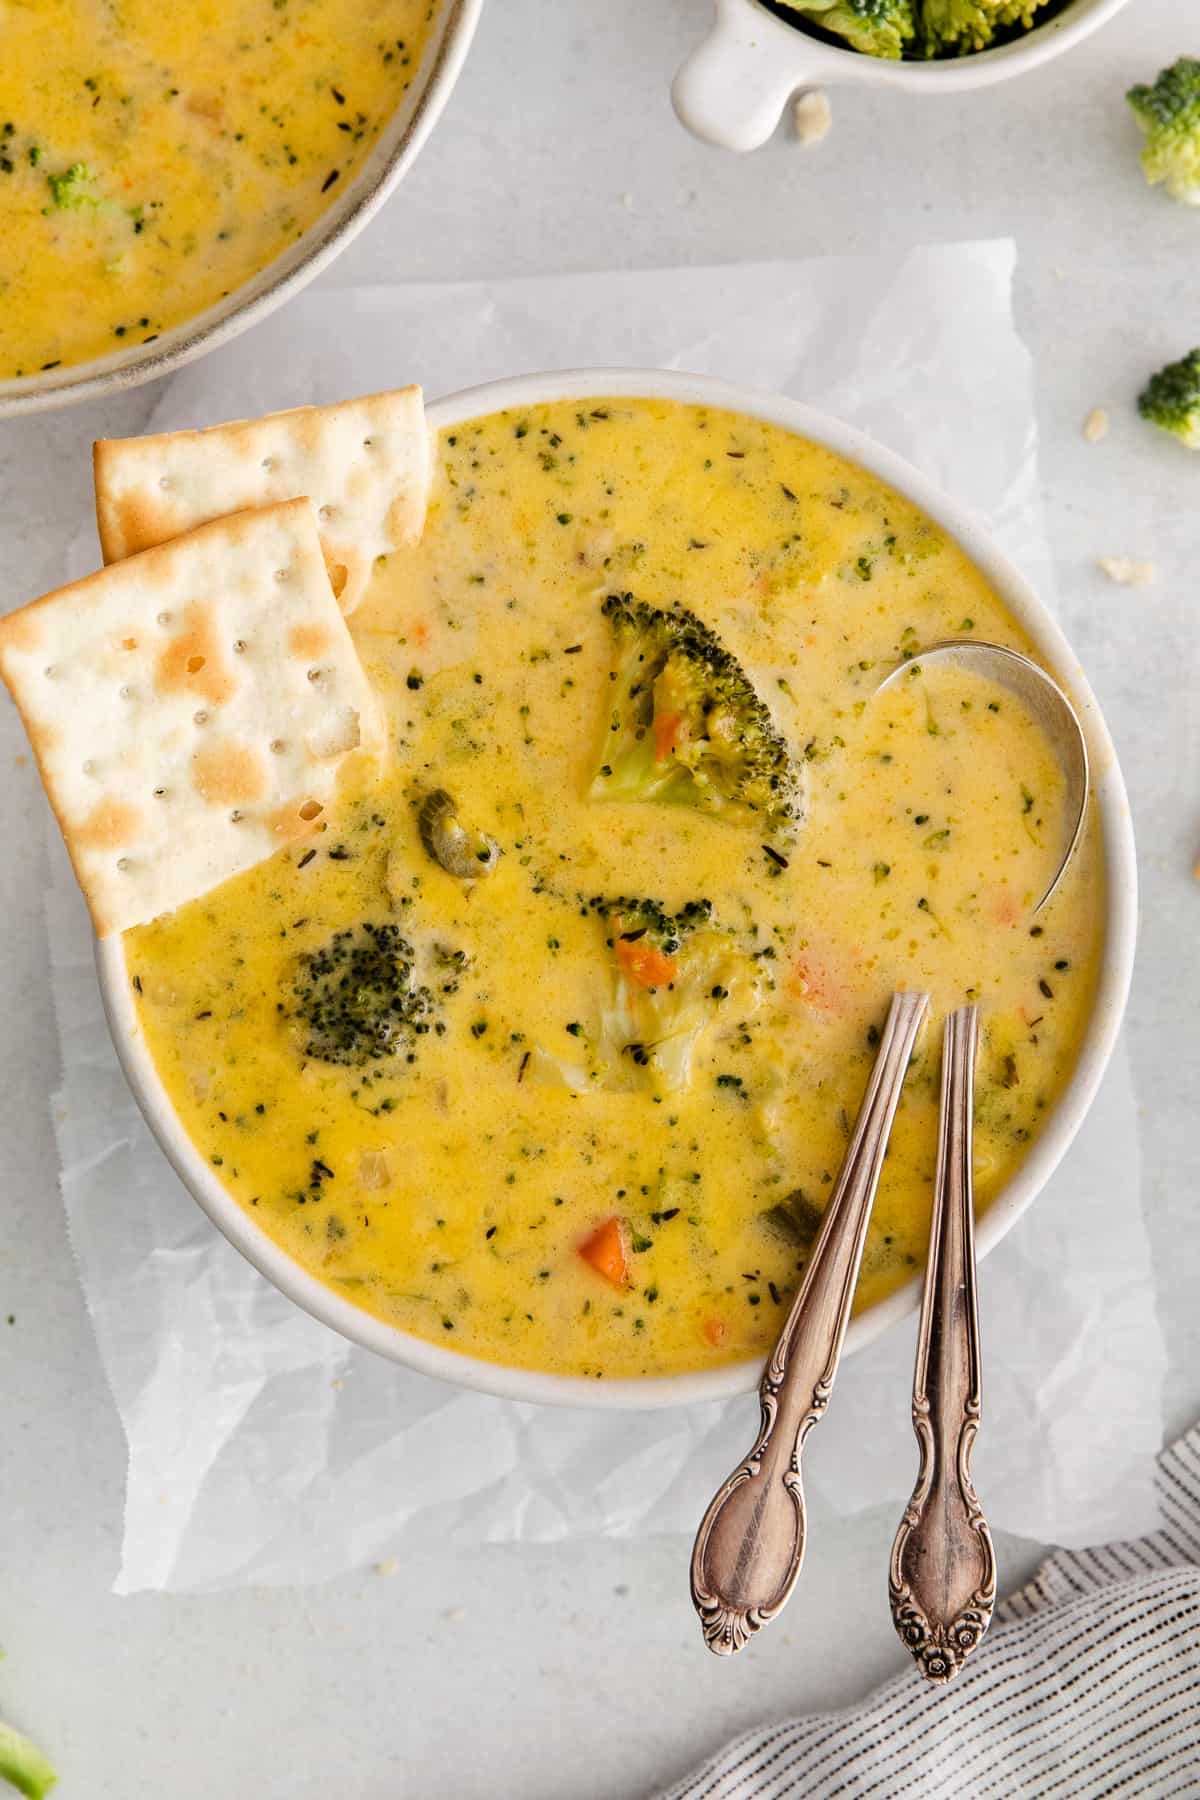 Broccoli potato cheese soup with crackers on the side.